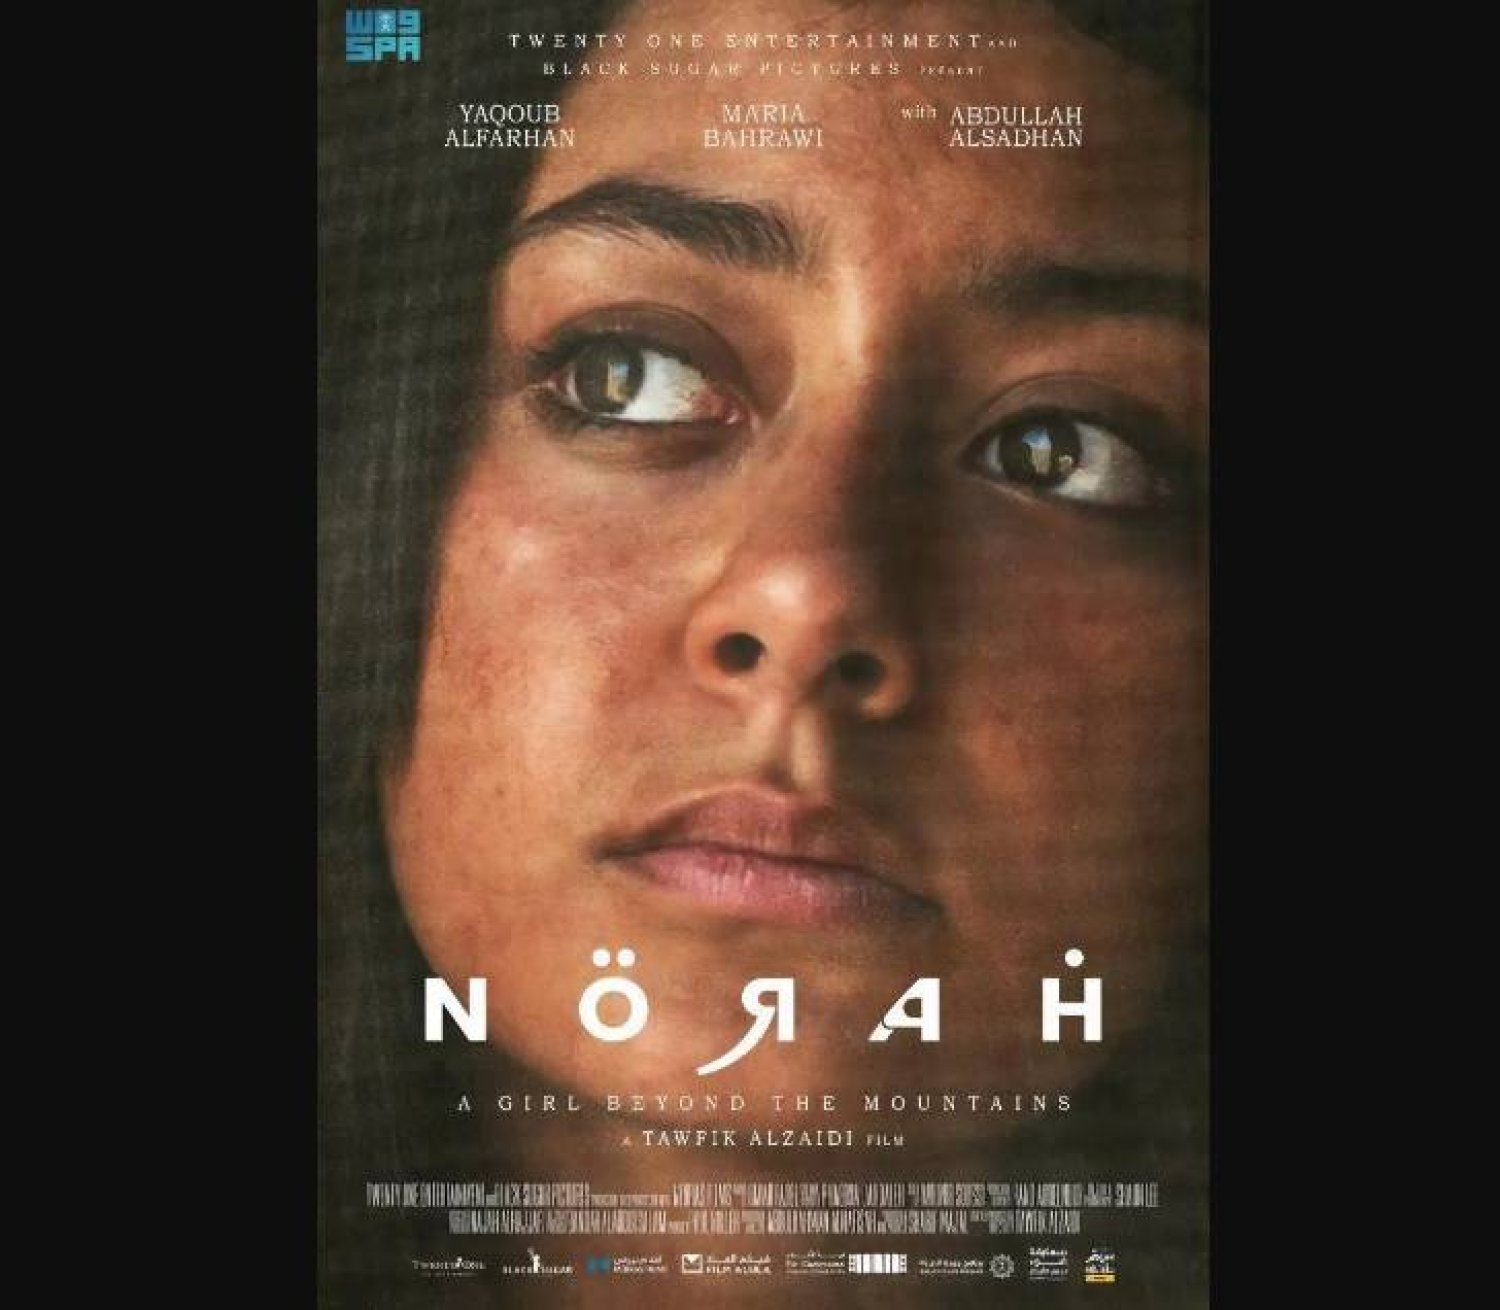 The Cannes Film Festival announced that the Saudi film "Norah" shas been chosen as part of the festival's Official Selection in the 'Un Certain Regard' section. SPA